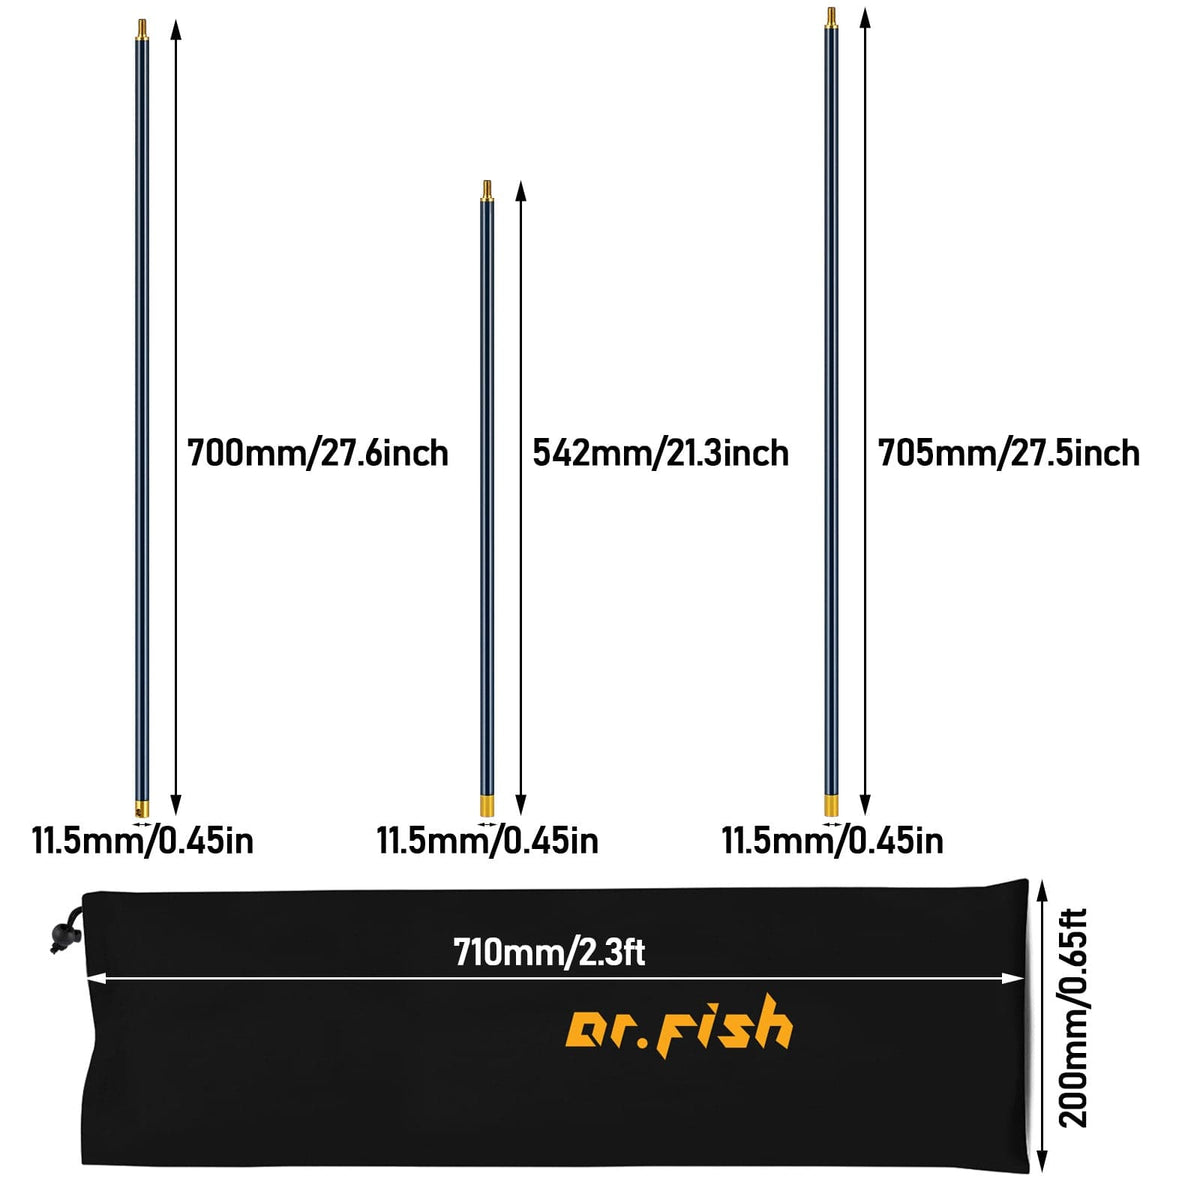 Dr.Fish 21.3-27.6in Spearfishing Poles &Materials Kit